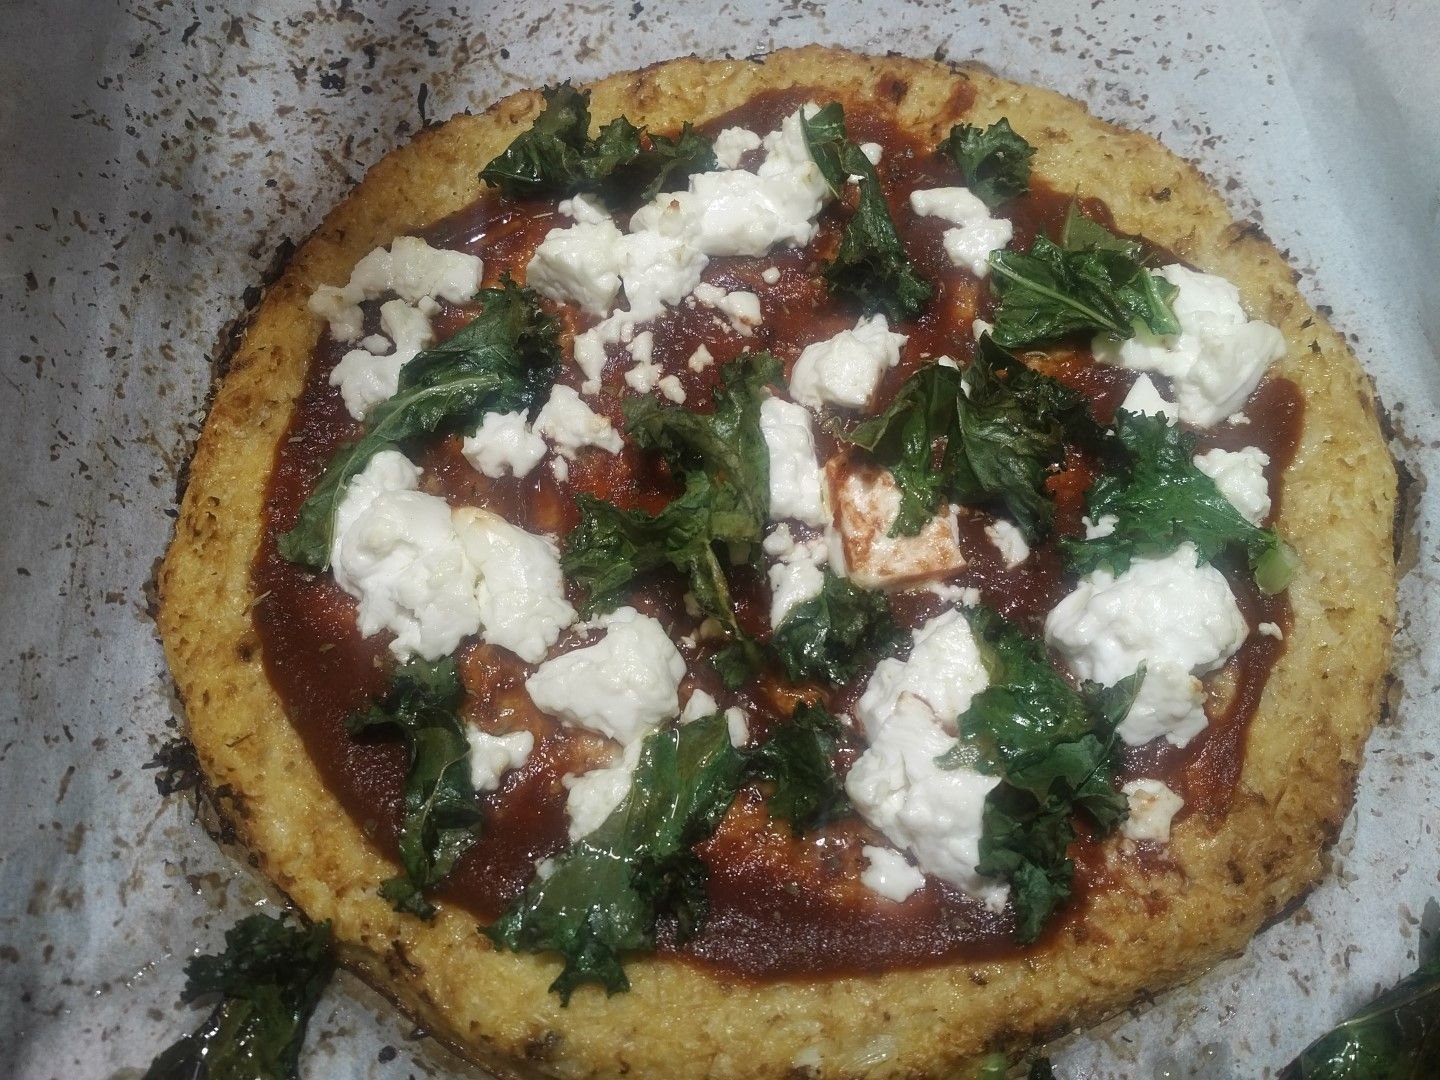 Fancy a pizza without the gluten or the insulin spike? – Try this plant-based pizza crust recipe